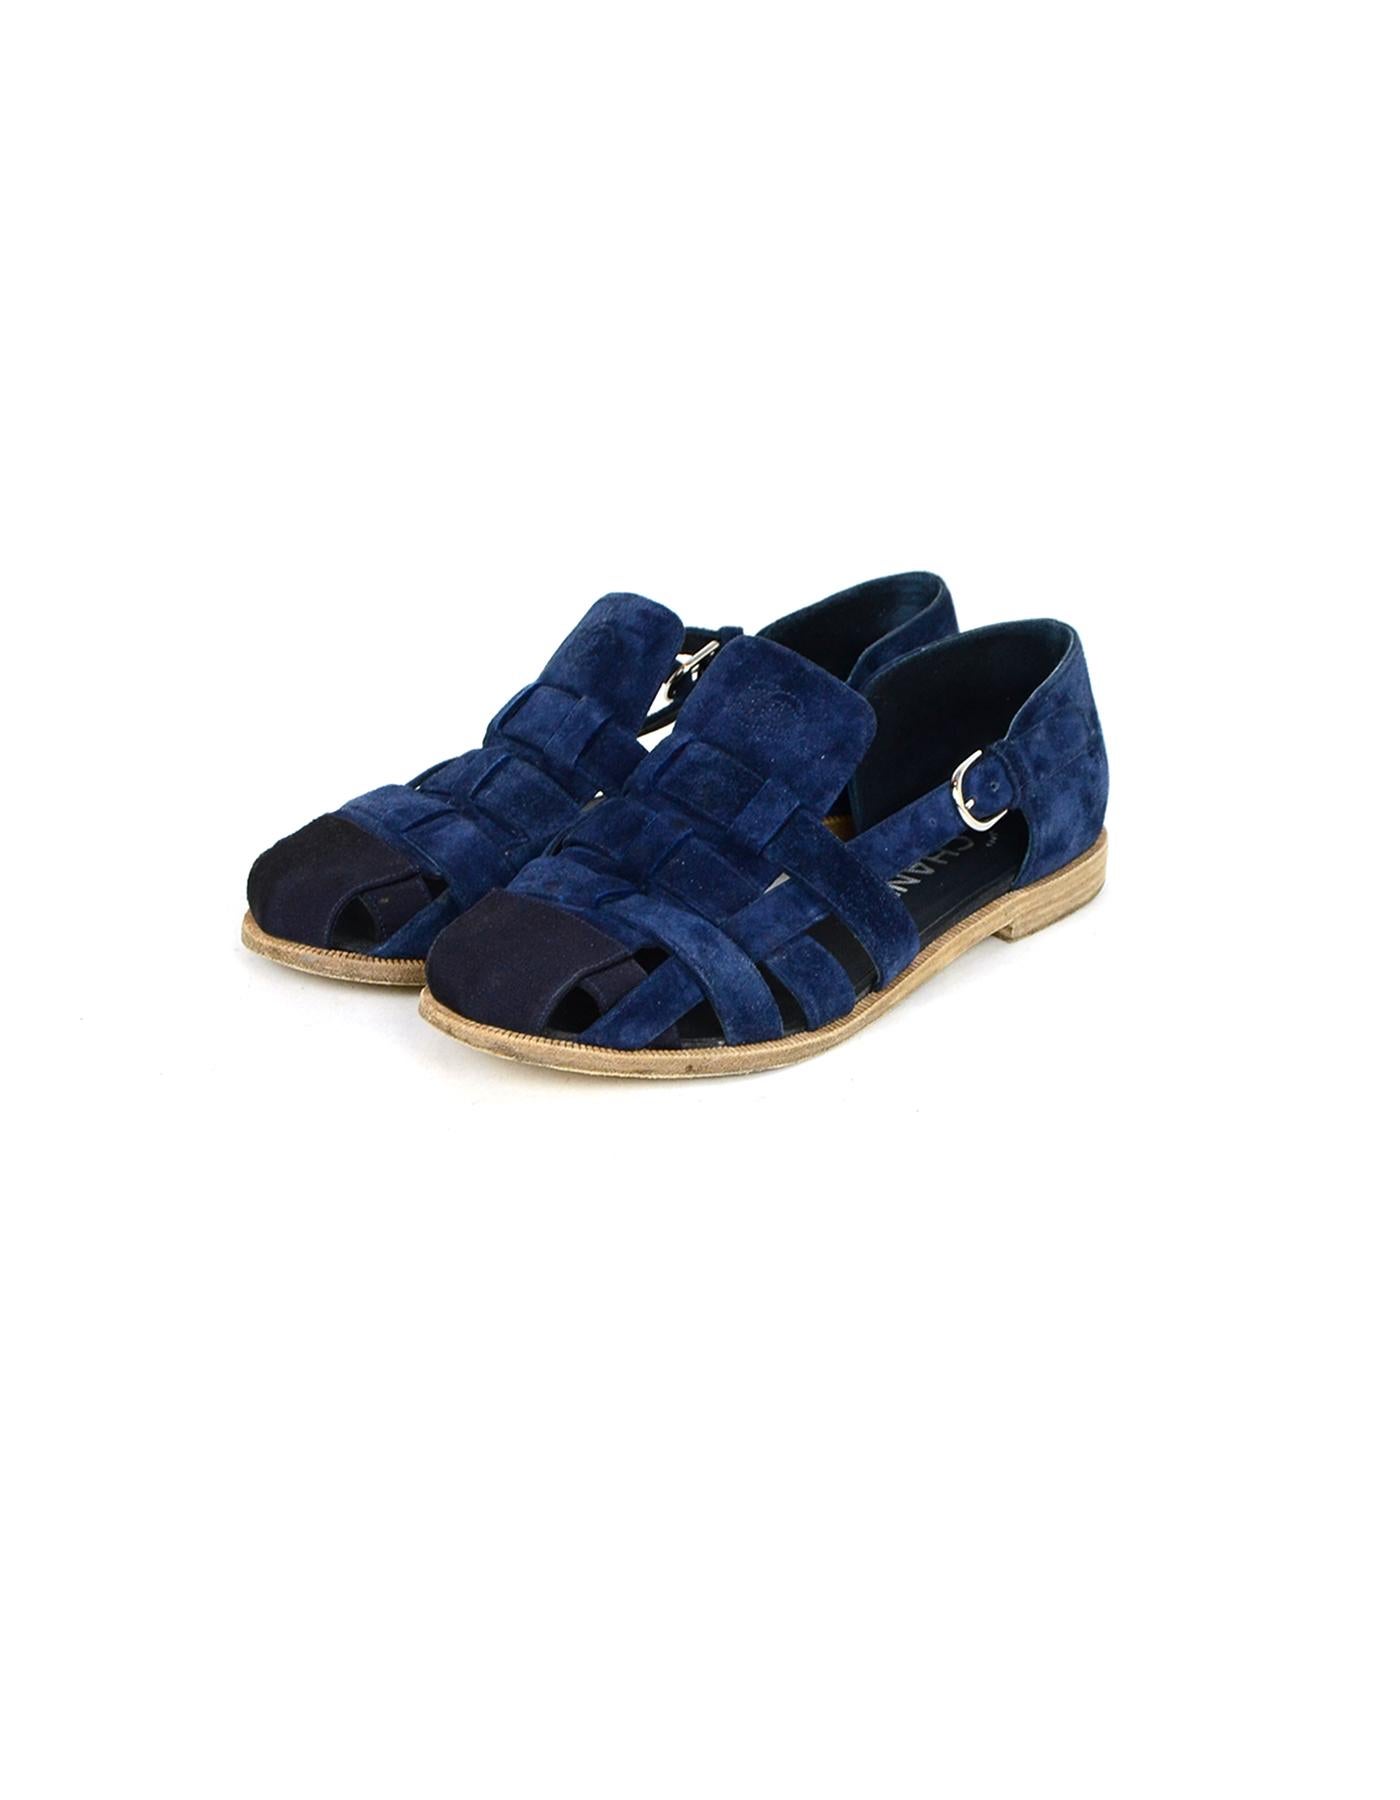 Chanel Navy Suede Woven Sandals sz 37.5

Made In: Italy
Color: Navy
Hardware: Silvertone
Materials: Suede
Closure/Opening: Side buckle
Overall Condition: Very good pre-owned condition, minor wear on the insoles and wear on the soles, some marks on